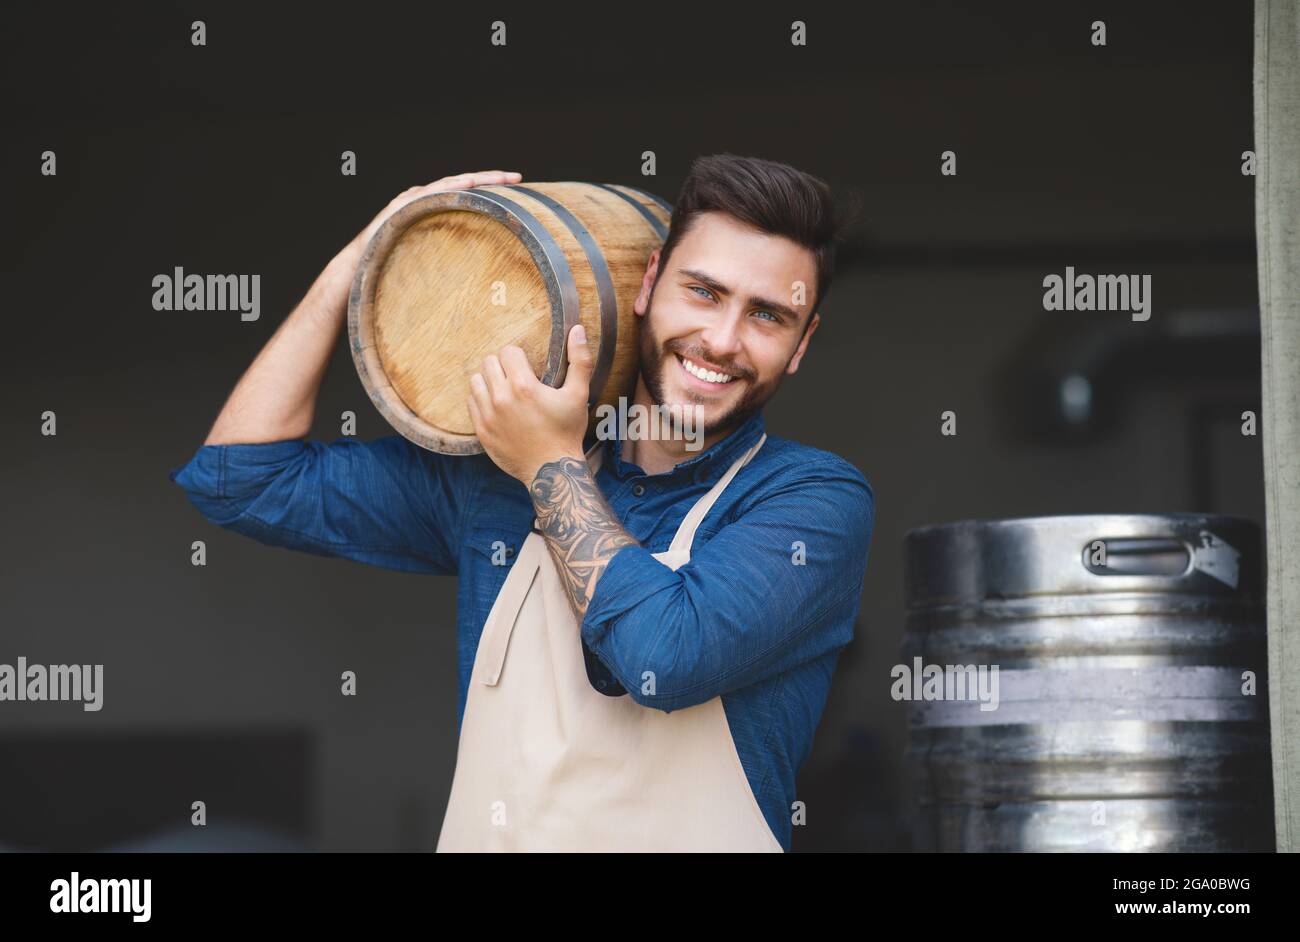 Satisfied successful worker or brewer and positive facial expression Stock Photo